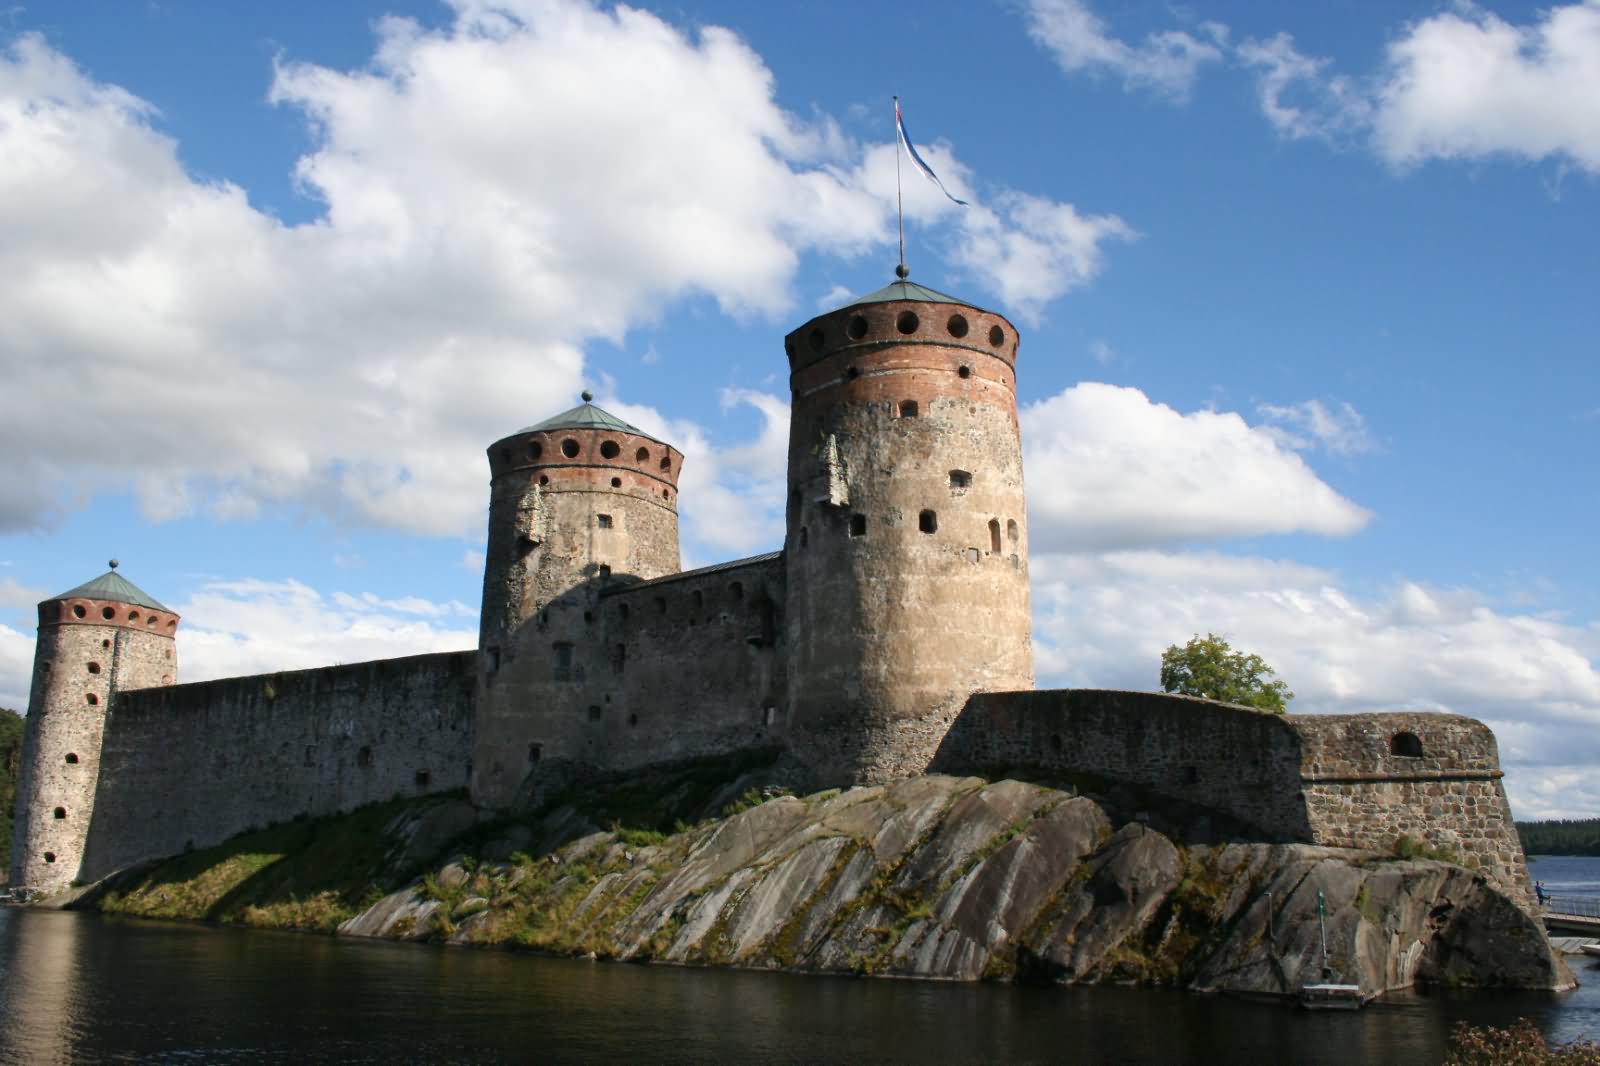 Side View Image Of The Olavinlinna Fortress